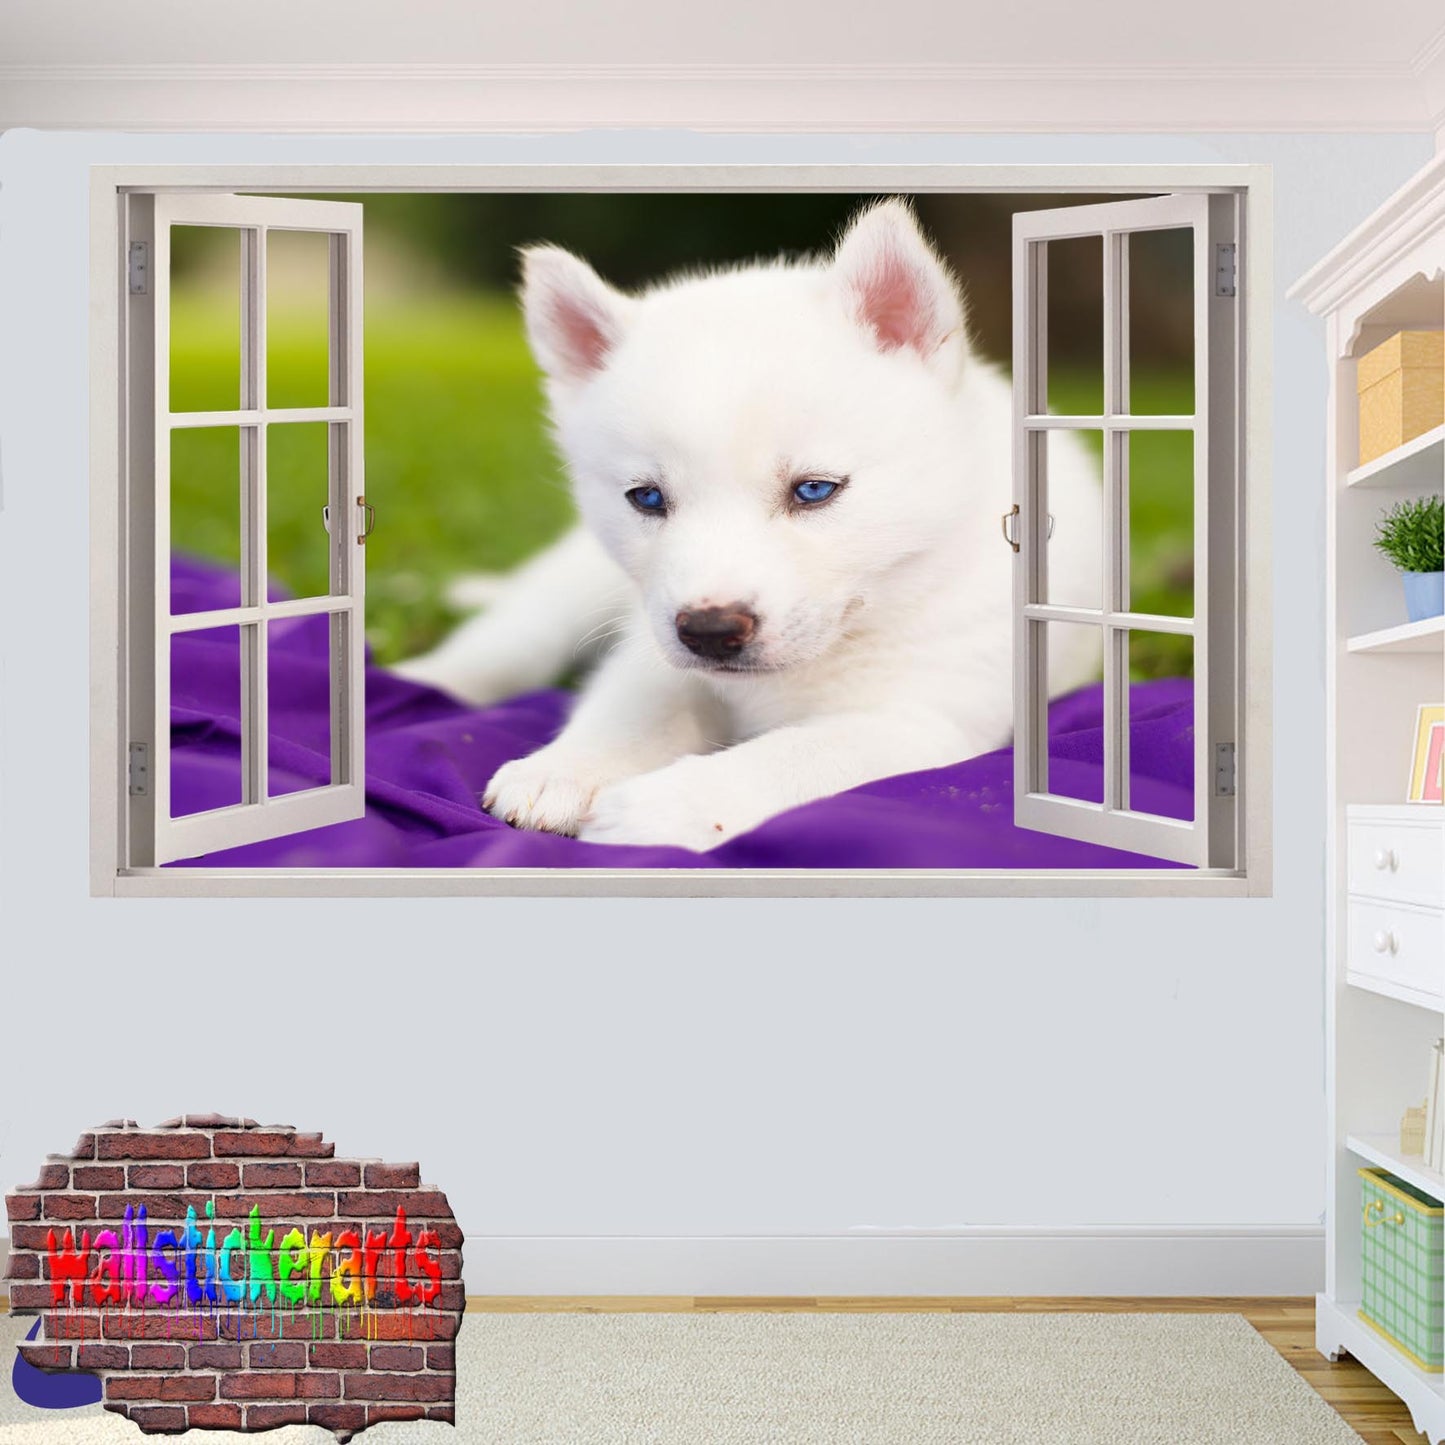 White Husky Pup 3d Art Smashed Effect Wall Sticker Room Office Nursery Shop Decor Decal Mural